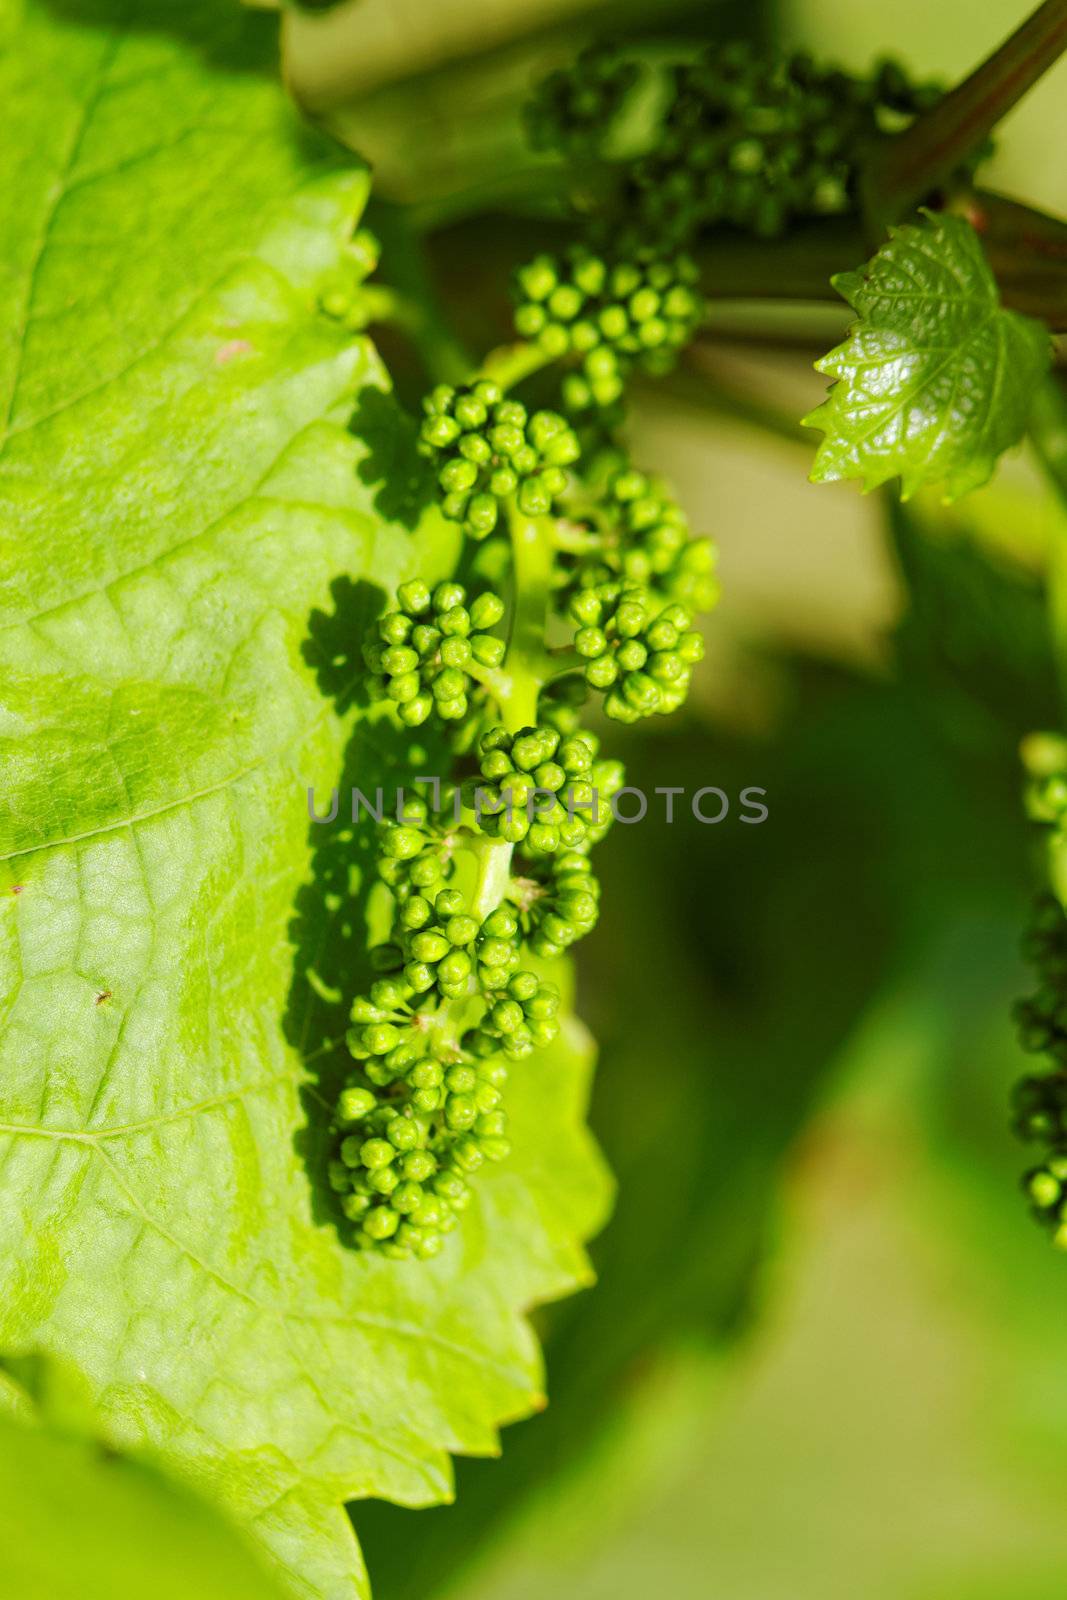 baby green grapes on the vine